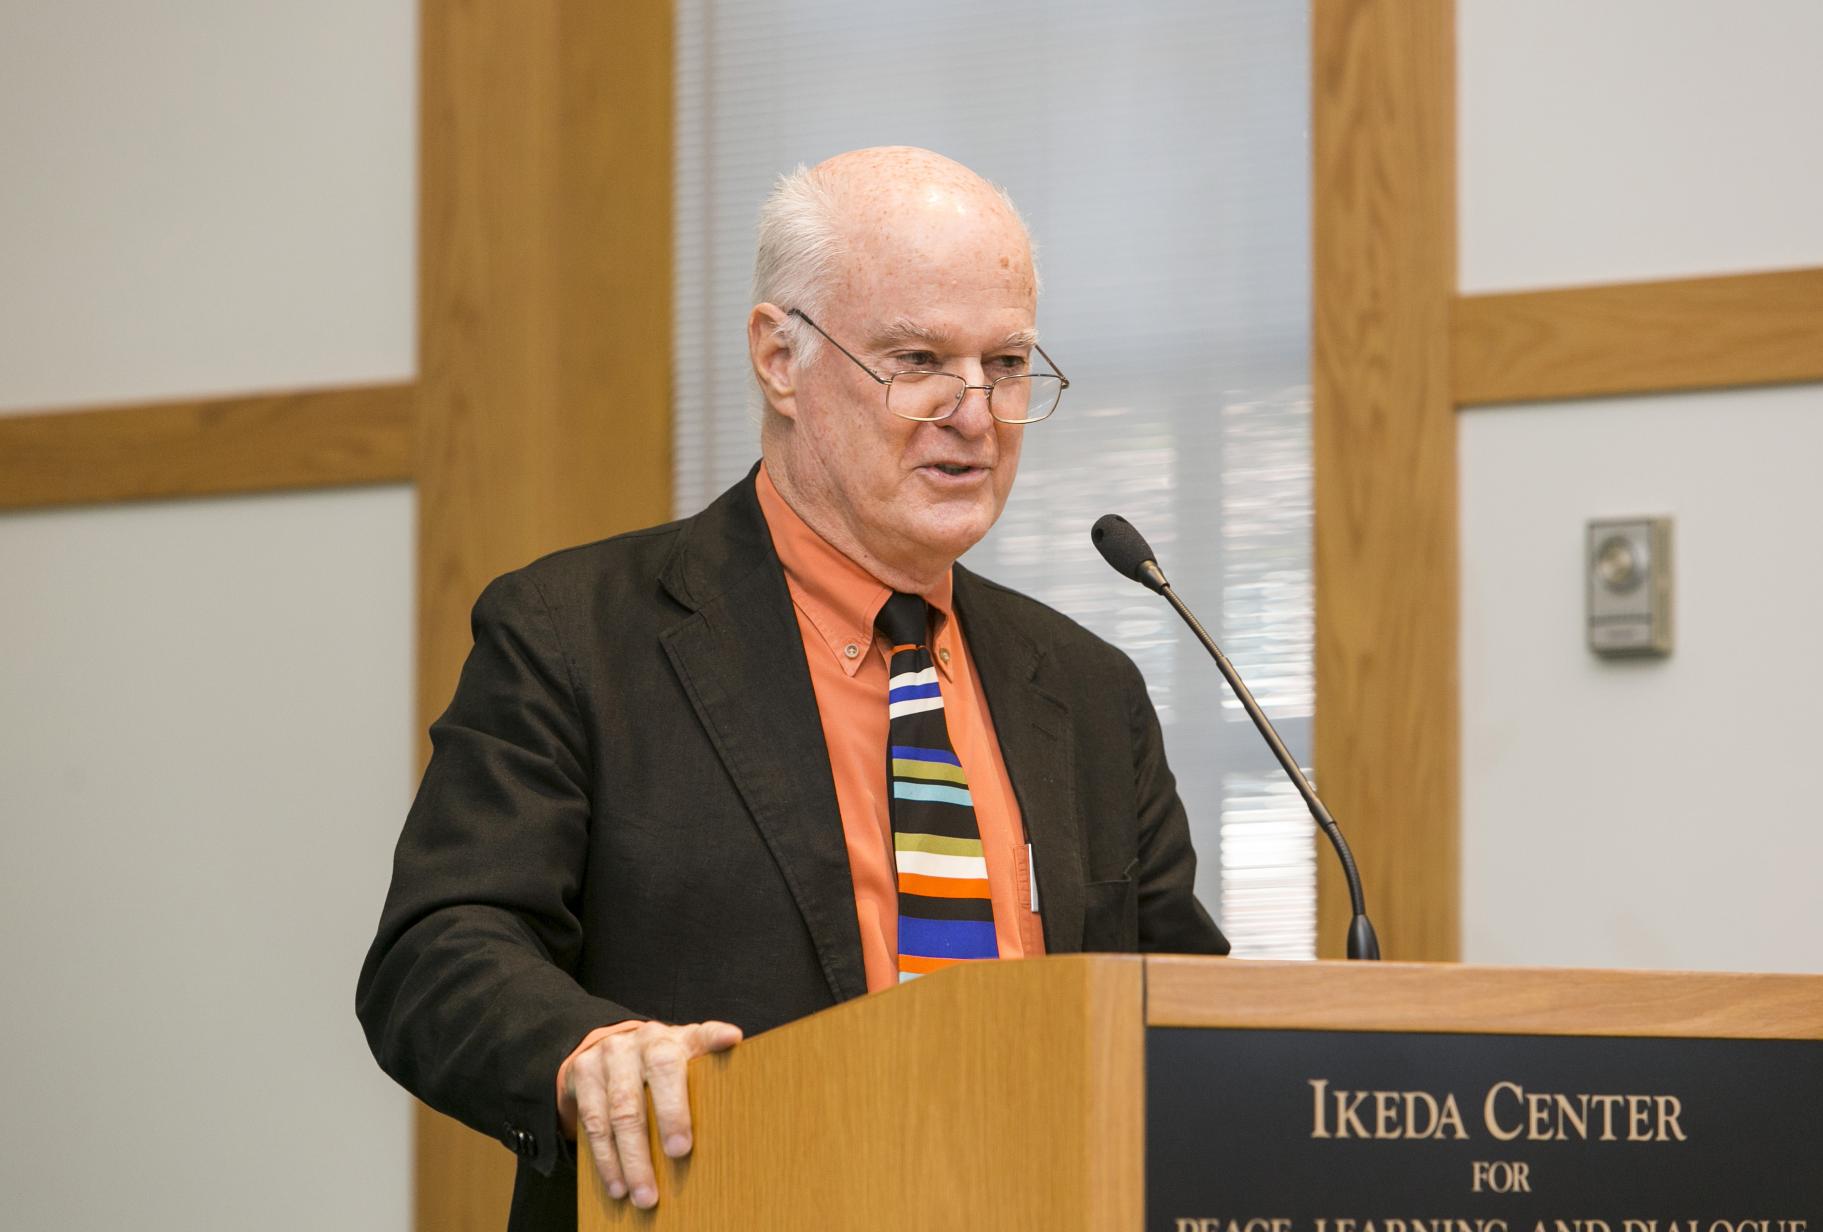 2014 Ikeda Forum speaker Charlie Clements speaking at the podium